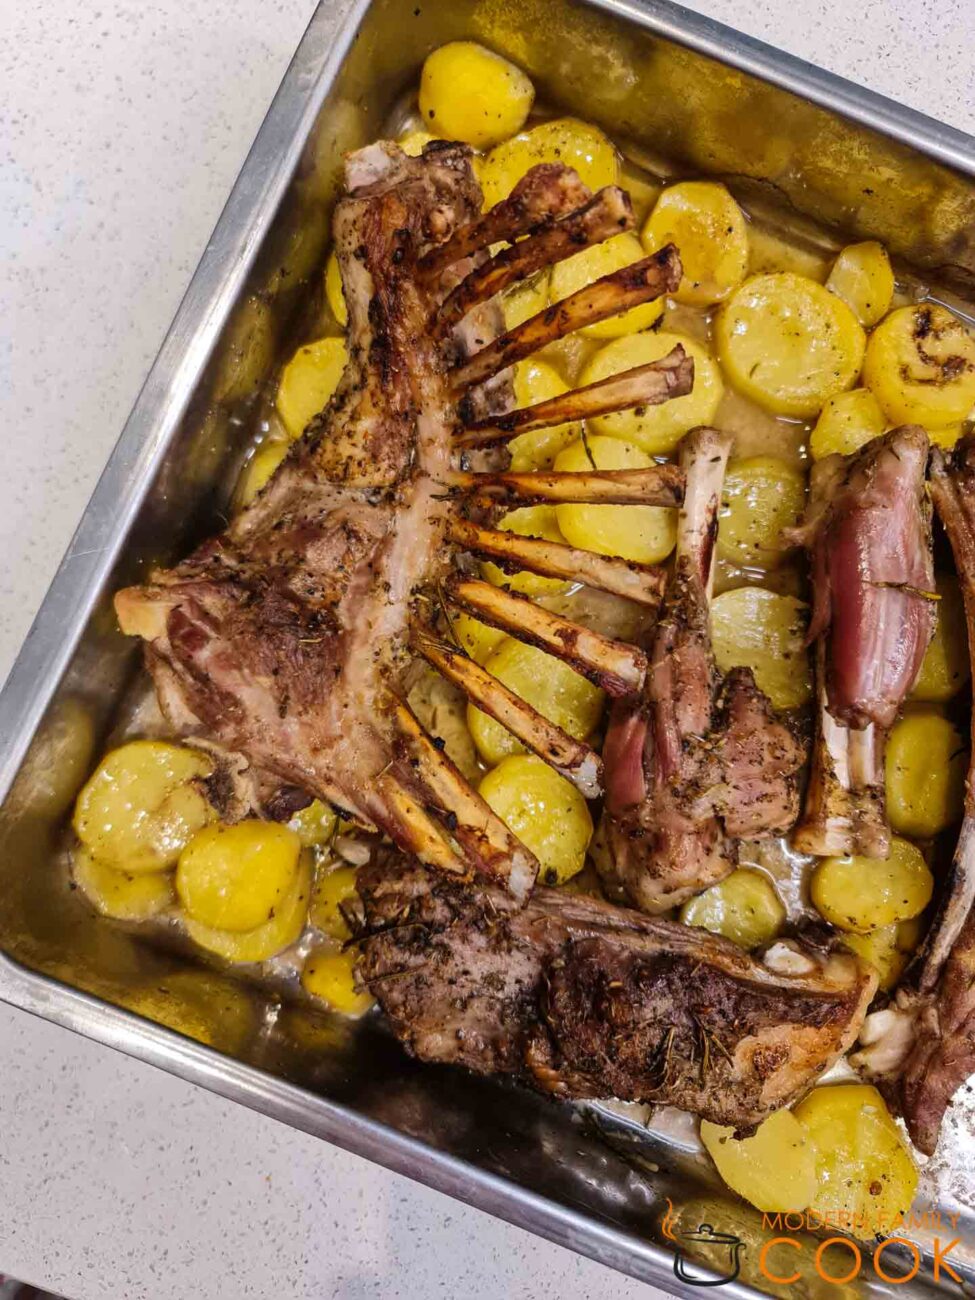 Lemon Lamb and Goat Ribs in the Oven